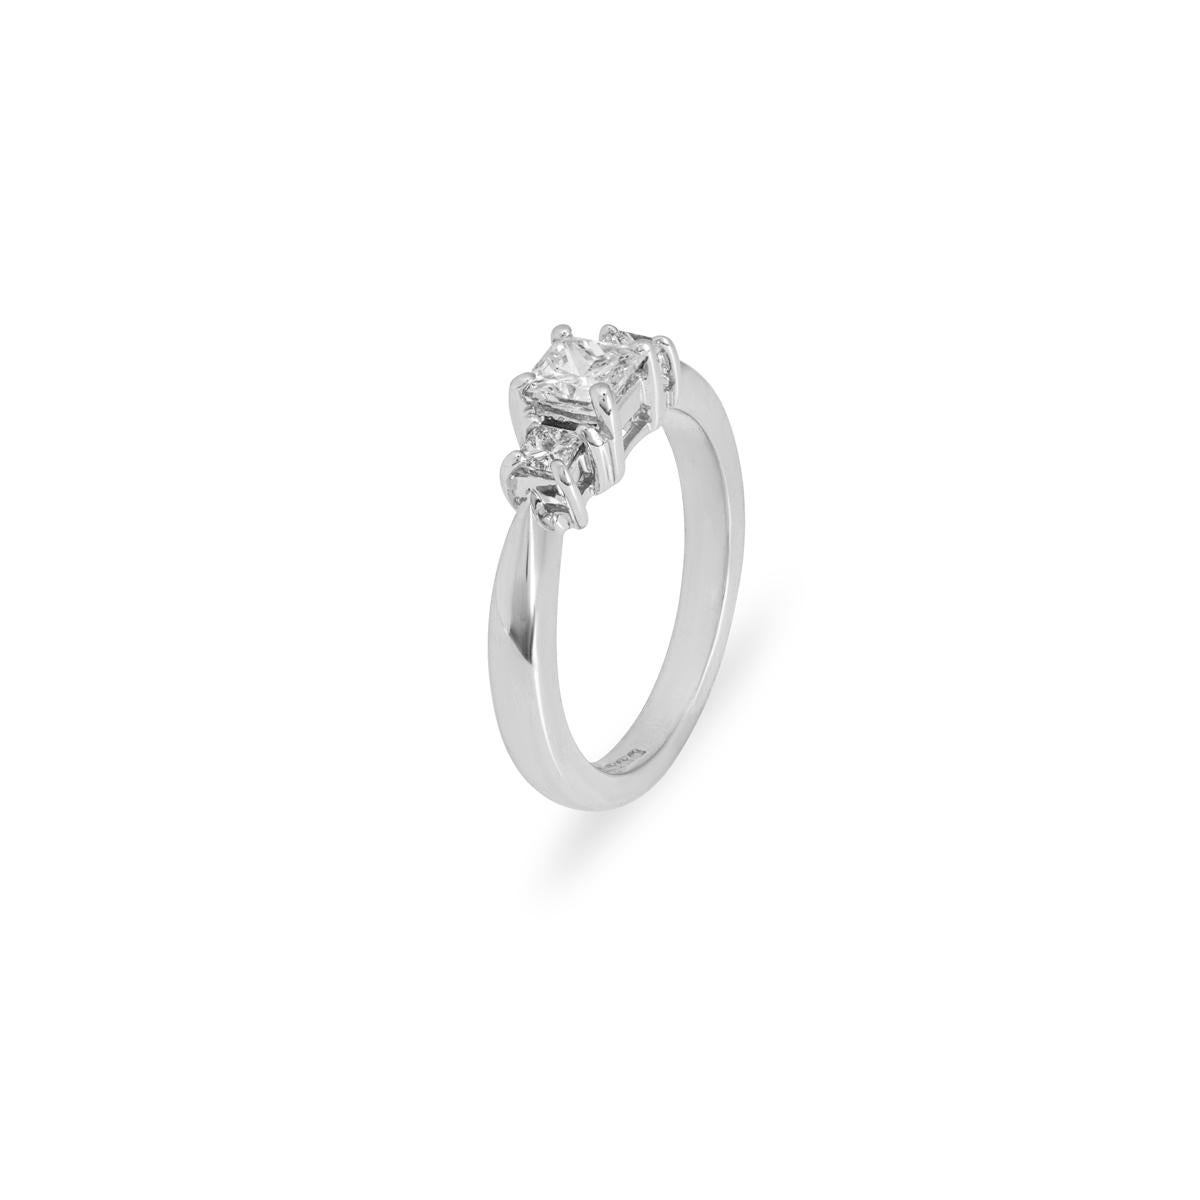 A beautiful 18k white gold diamond three stone ring. The ring is set to the centre with a princess cut diamond weighing 0.45ct, I colour and VS2 clarity. Further complementing the centre diamond are two princess cut diamonds set to either side